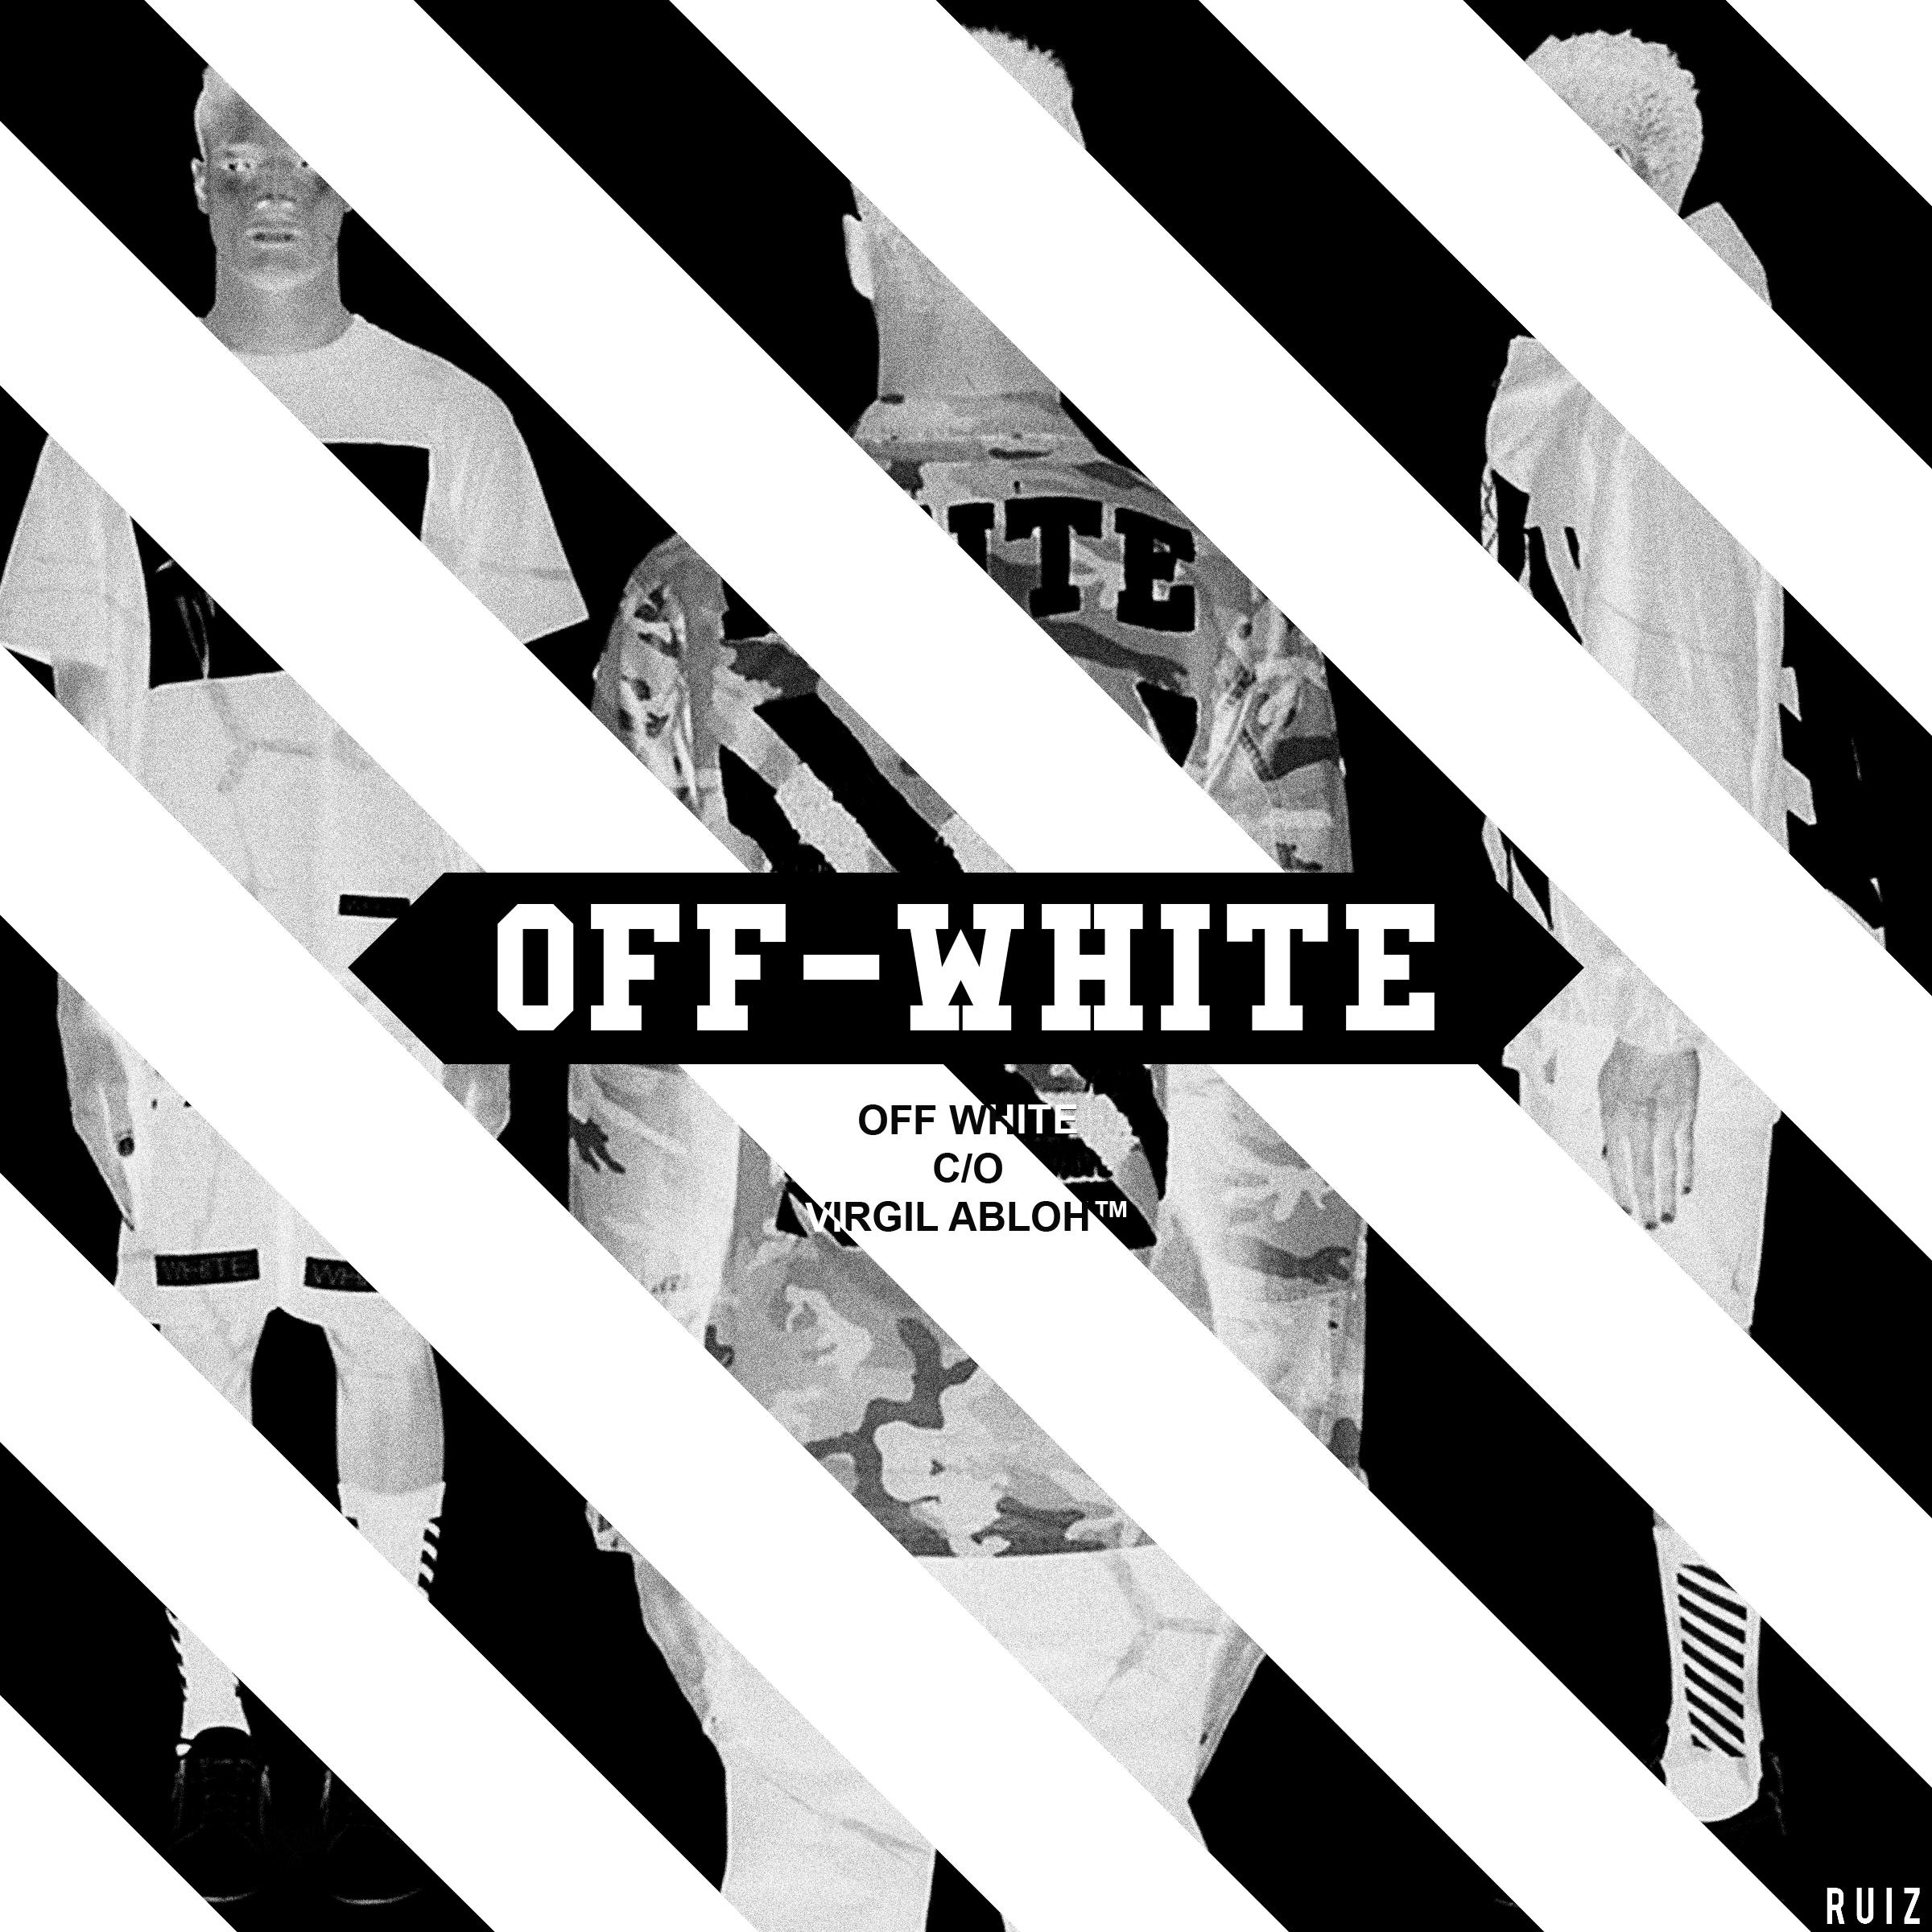 Off-White c/o Virgil Abloh arrives in Malaysia. - MASSES